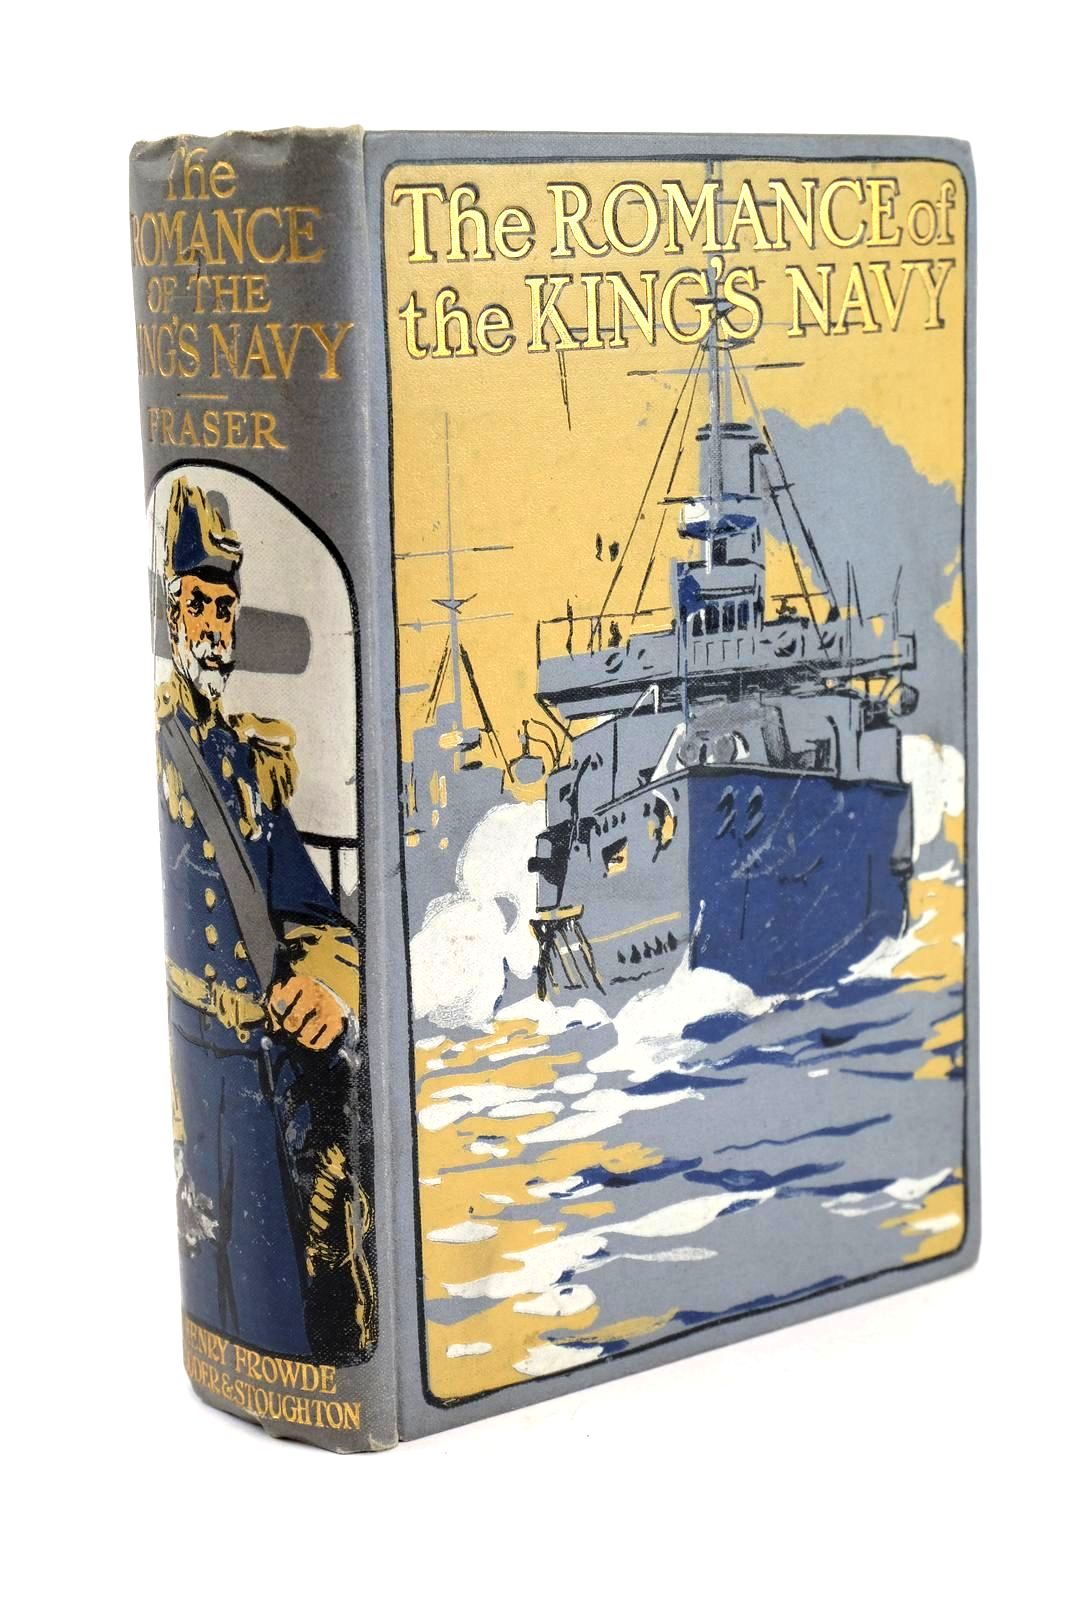 Photo of THE ROMANCE OF THE KING'S NAVY written by Fraser, Edward illustrated by Pitcher, N. Sotheby published by Hodder & Stoughton, Henry Frowde (STOCK CODE: 1324295)  for sale by Stella & Rose's Books